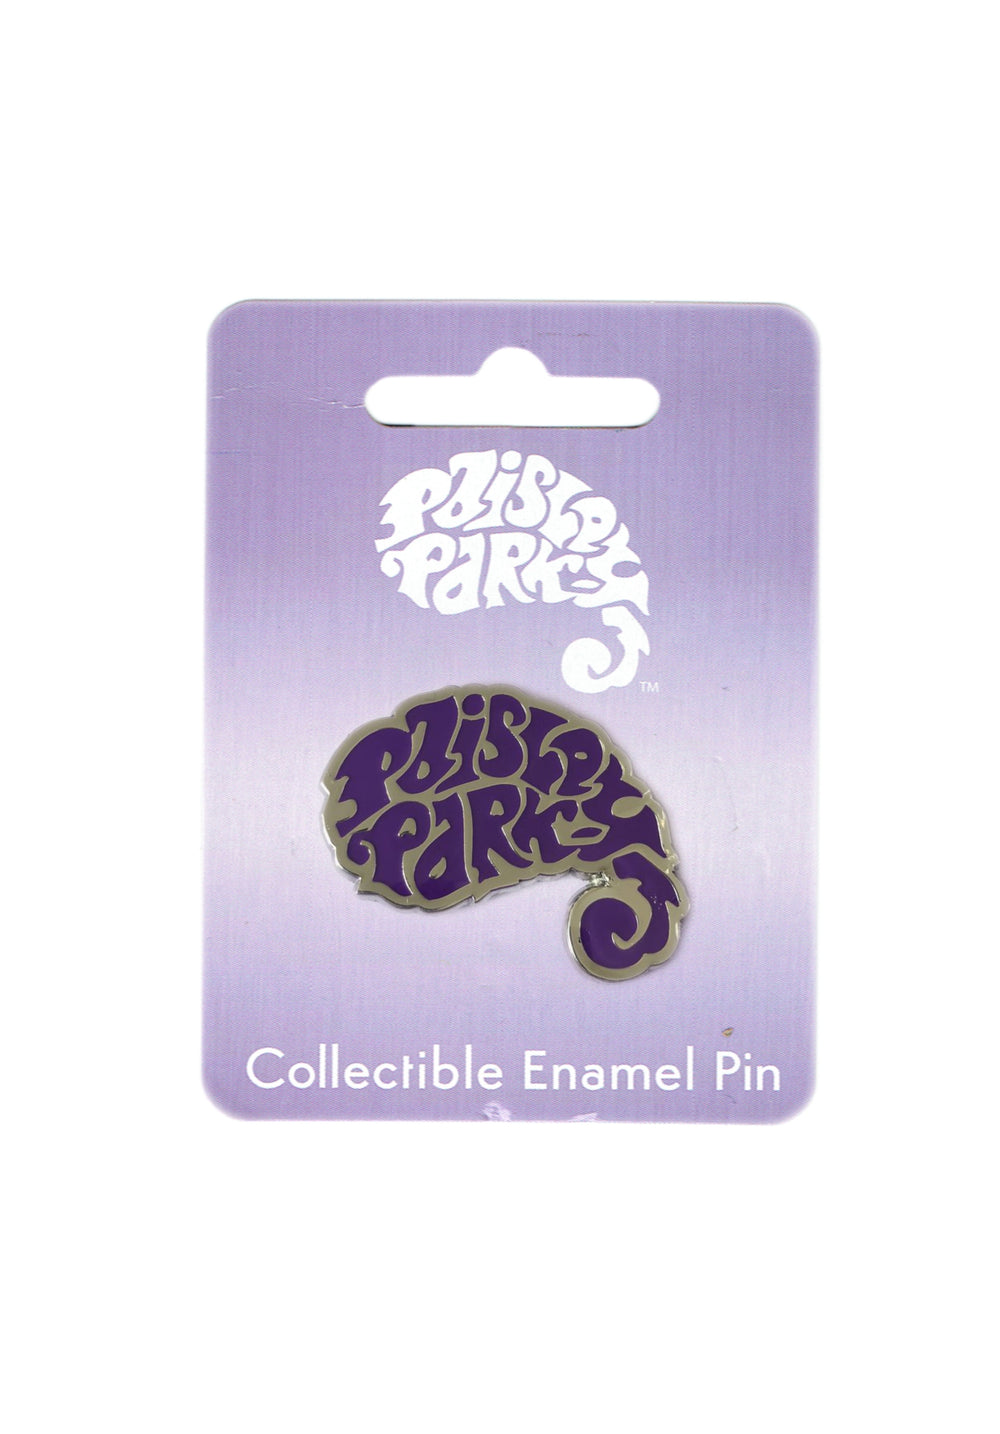 Prince Official Paisley Park Enamel Pin Brand New Paisley Shaped